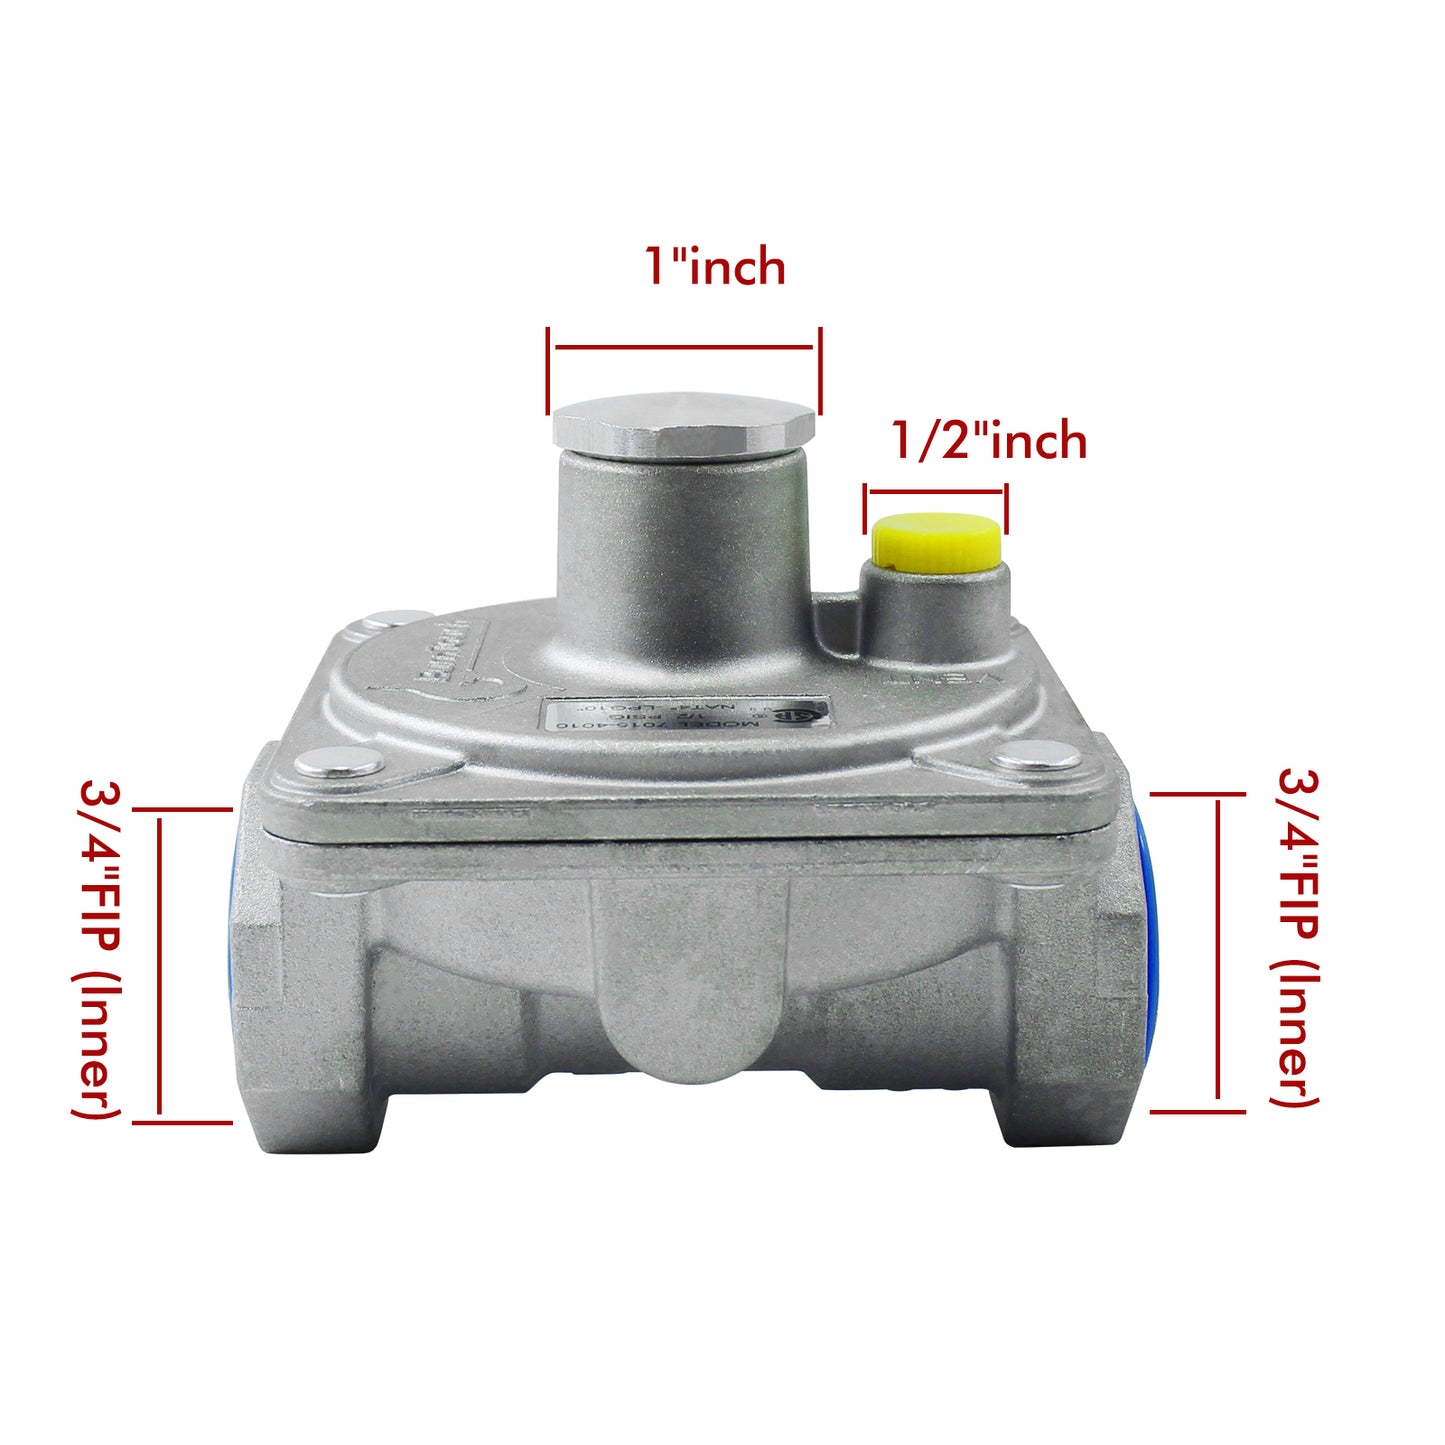 MENSI Natural Gas Pressure Regulator with 3/4" FNPT Thread, 1/2 PSIG Inlet Pressure and 4"-10" WC Outlet For Grill, Stove Range Pipe Lines